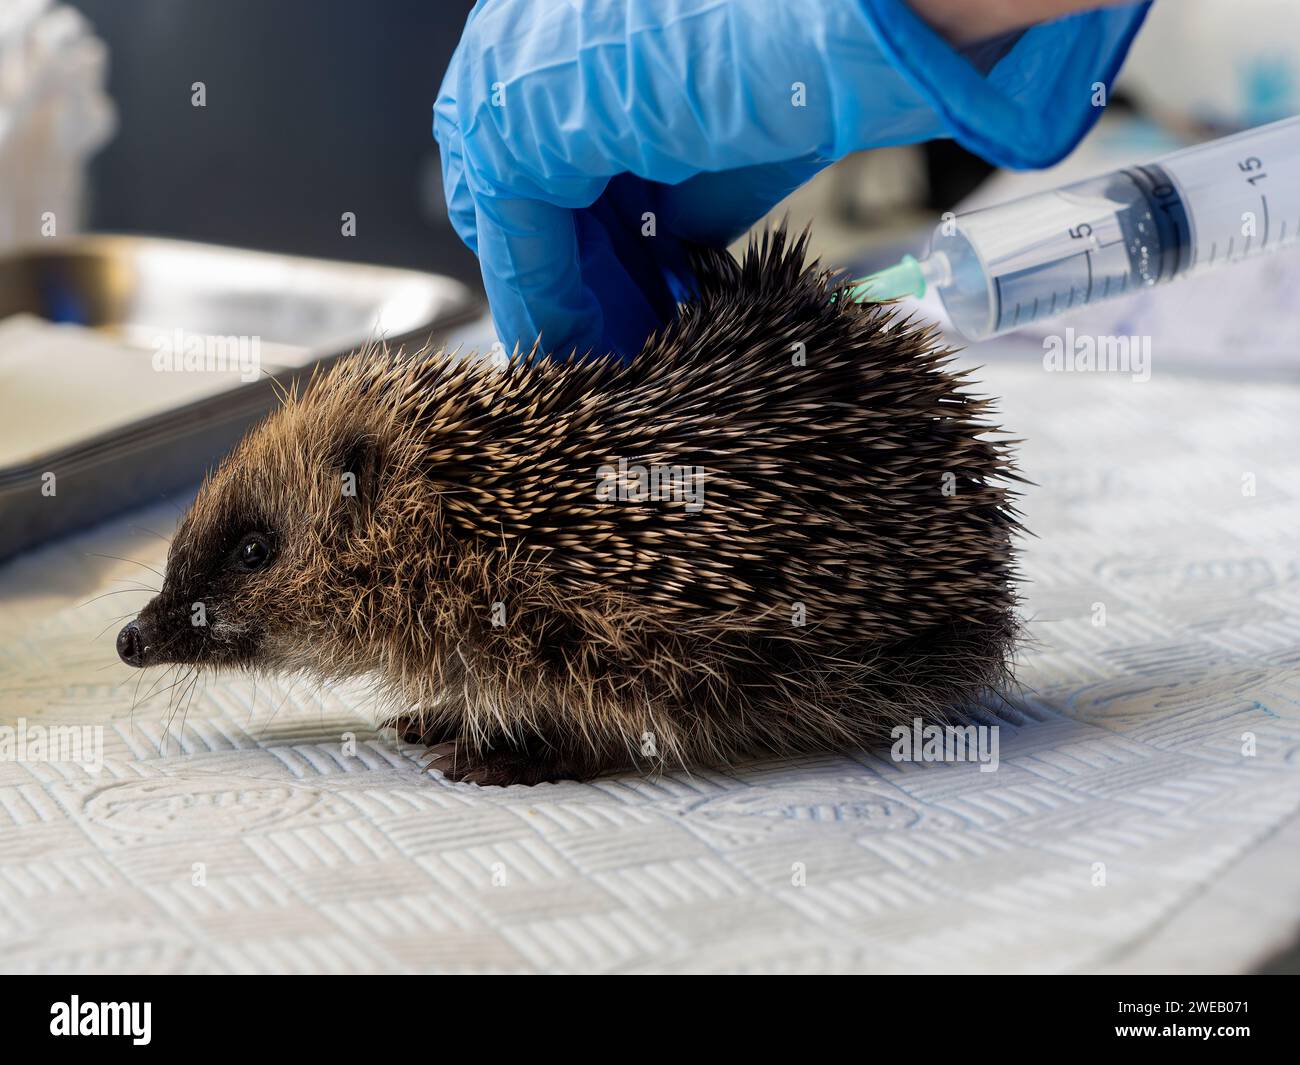 Documentary image of a european hedgehog in a rescue centre in the UK, receiving fluid injection for dehydration Stock Photo